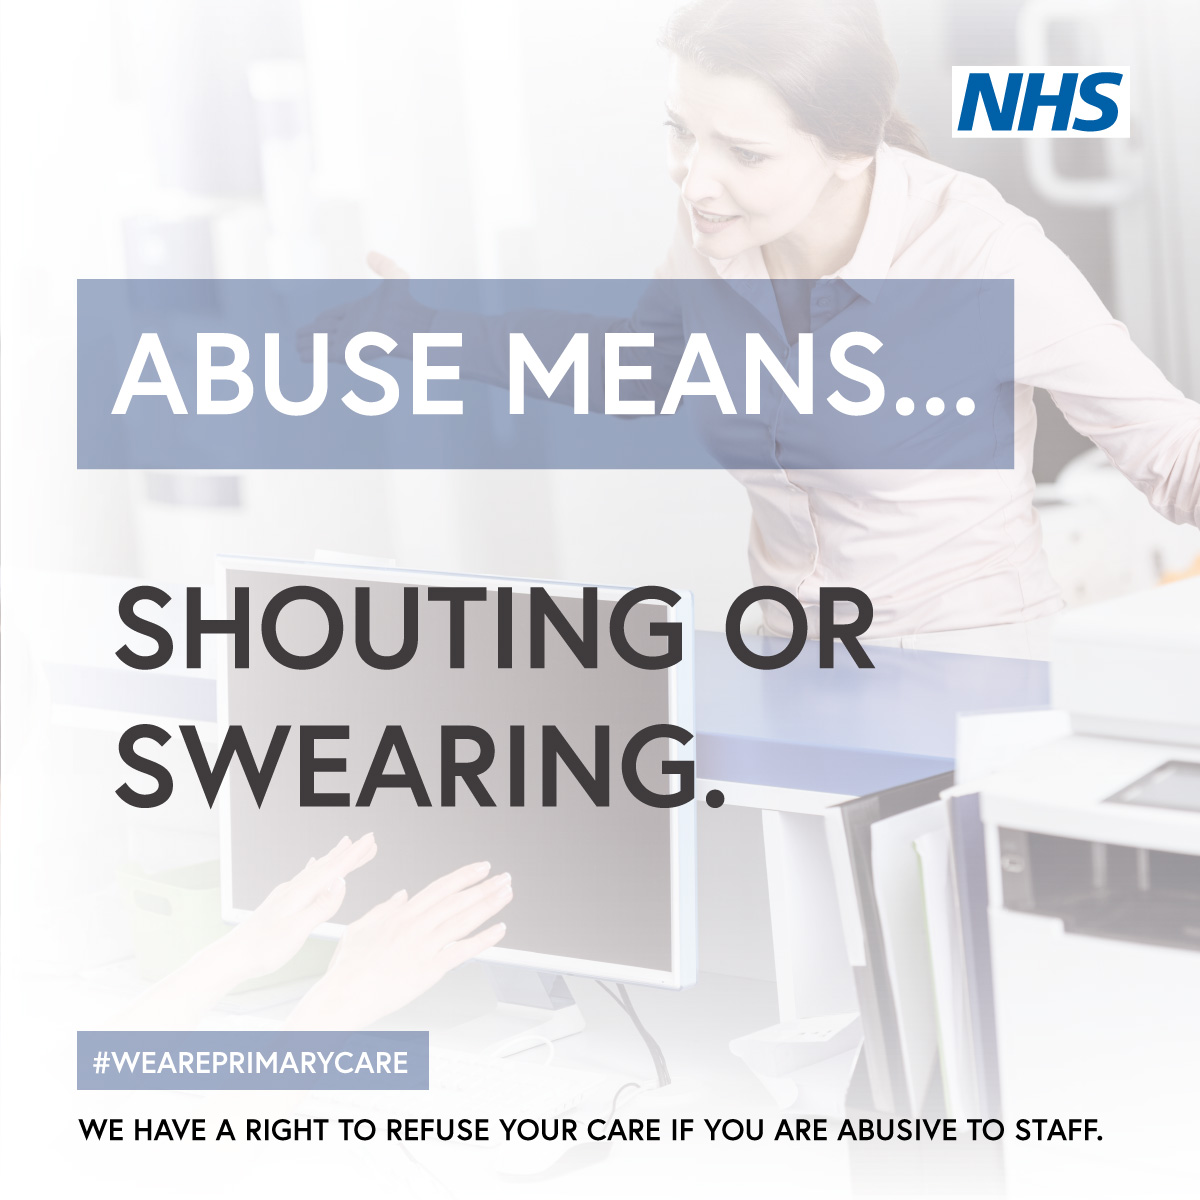 1 Abuse Means Shouting or Swearing